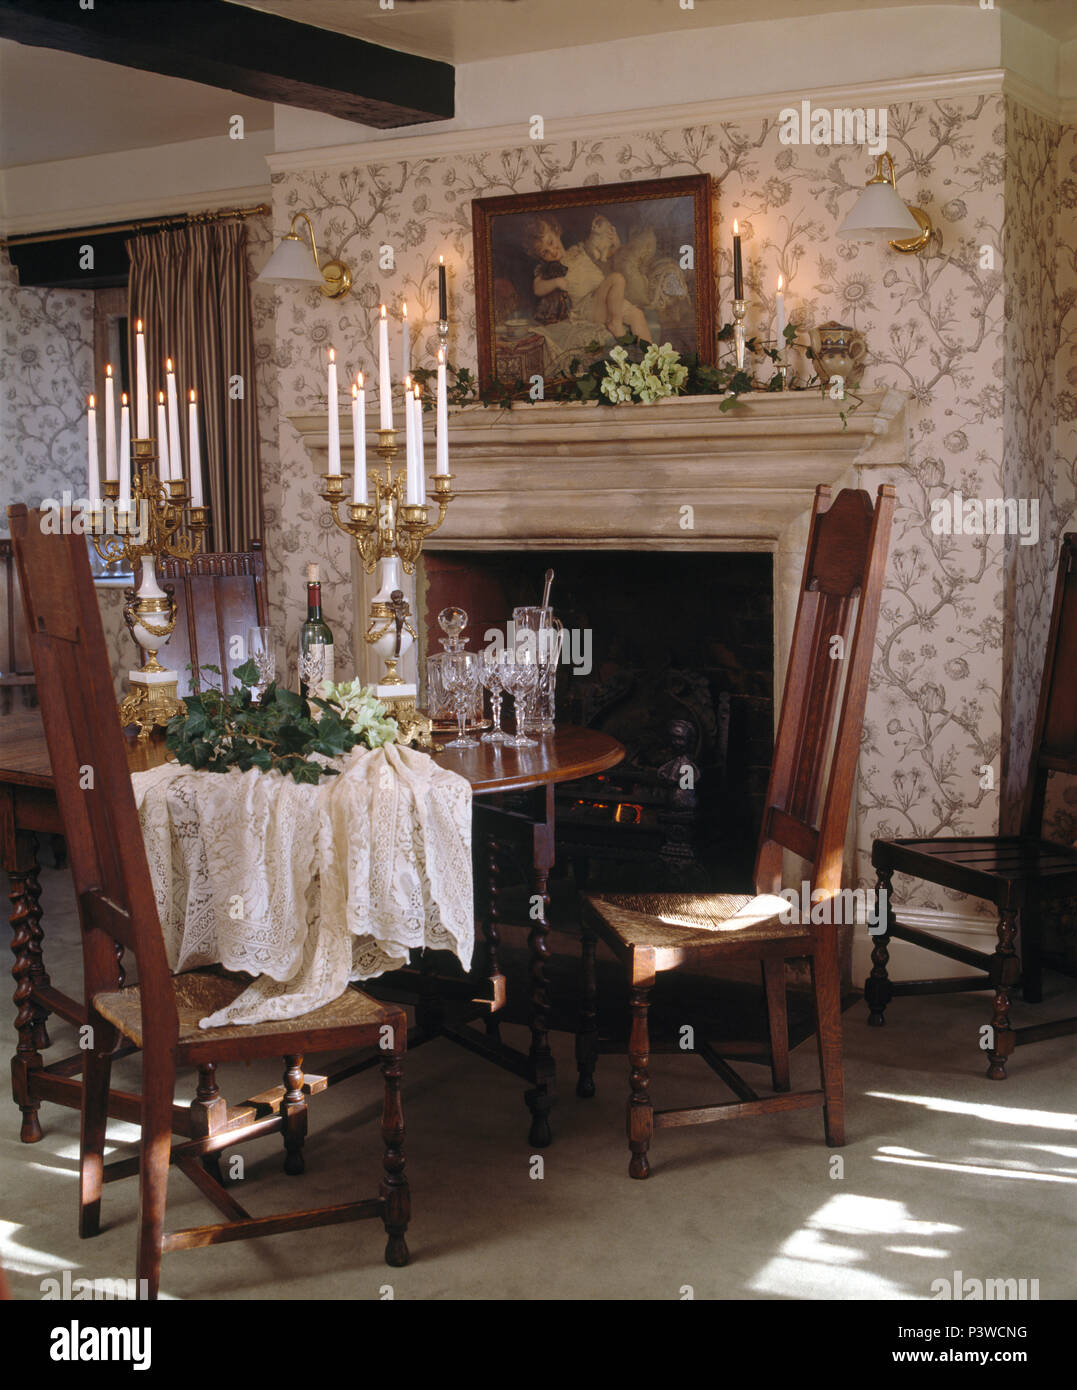 Antique Chairs And Table In Victorian Style Dining Room With